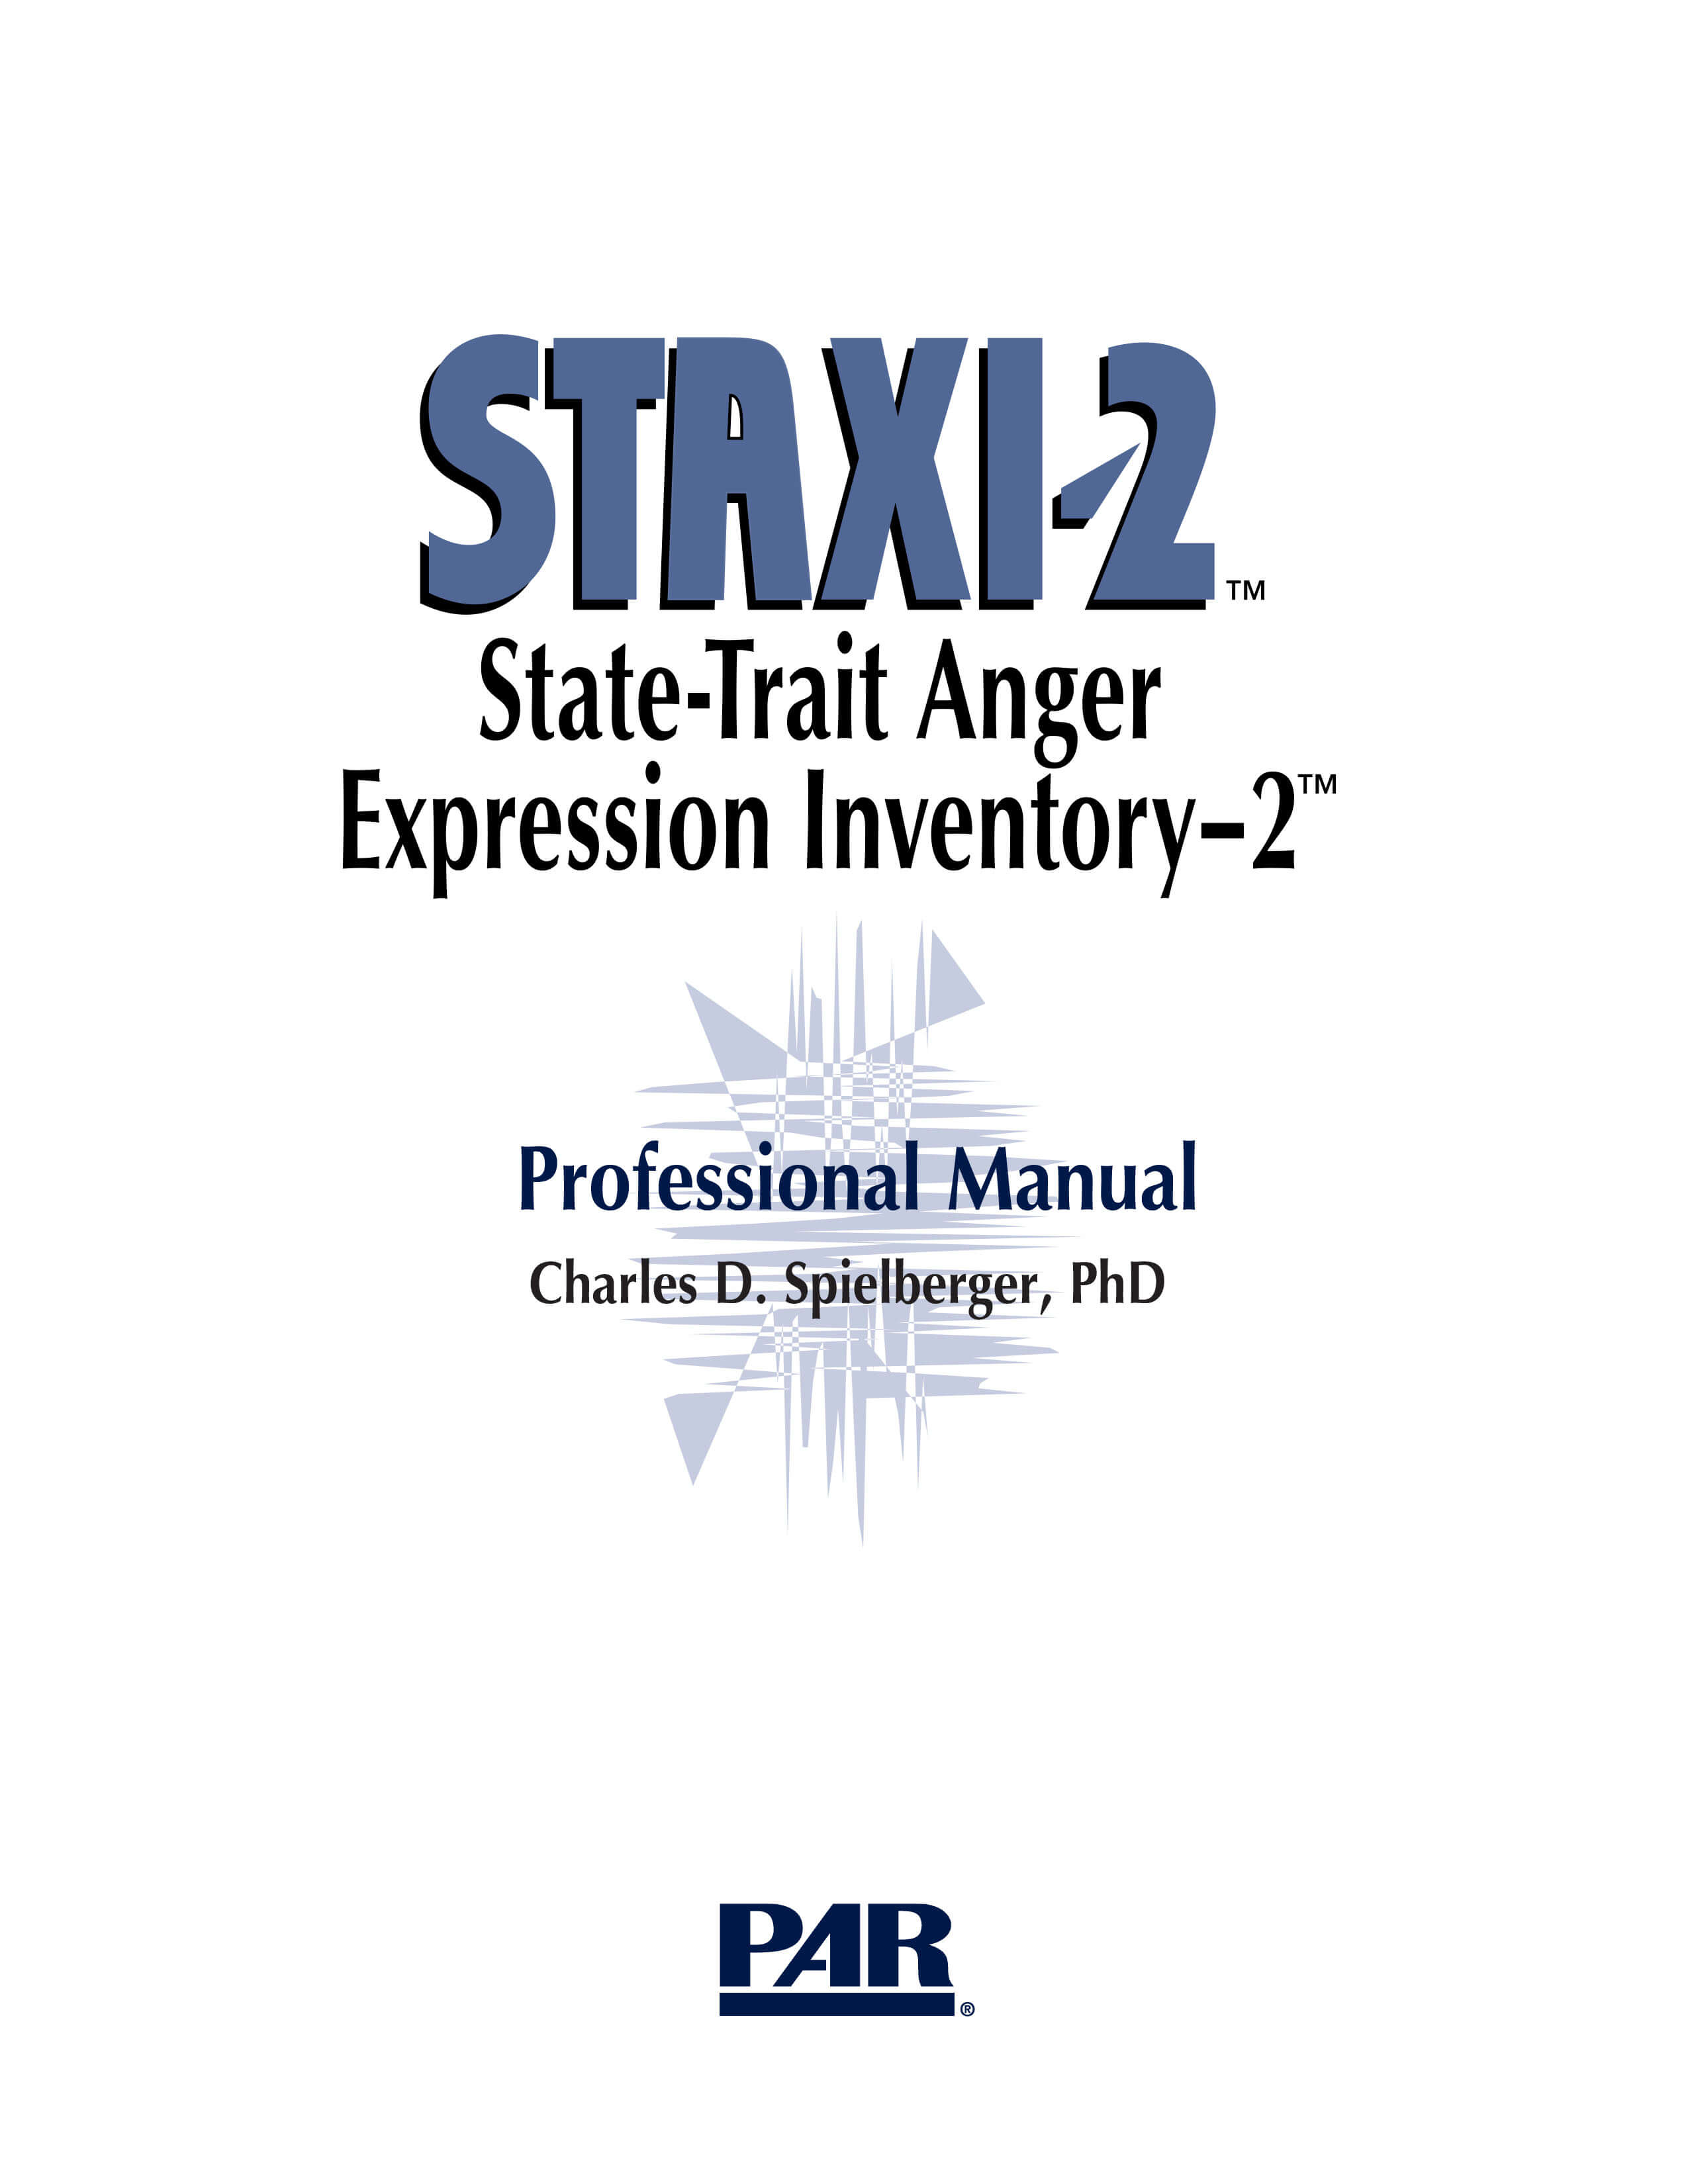 State-Trait Anger Expression Inventory-2™ - 